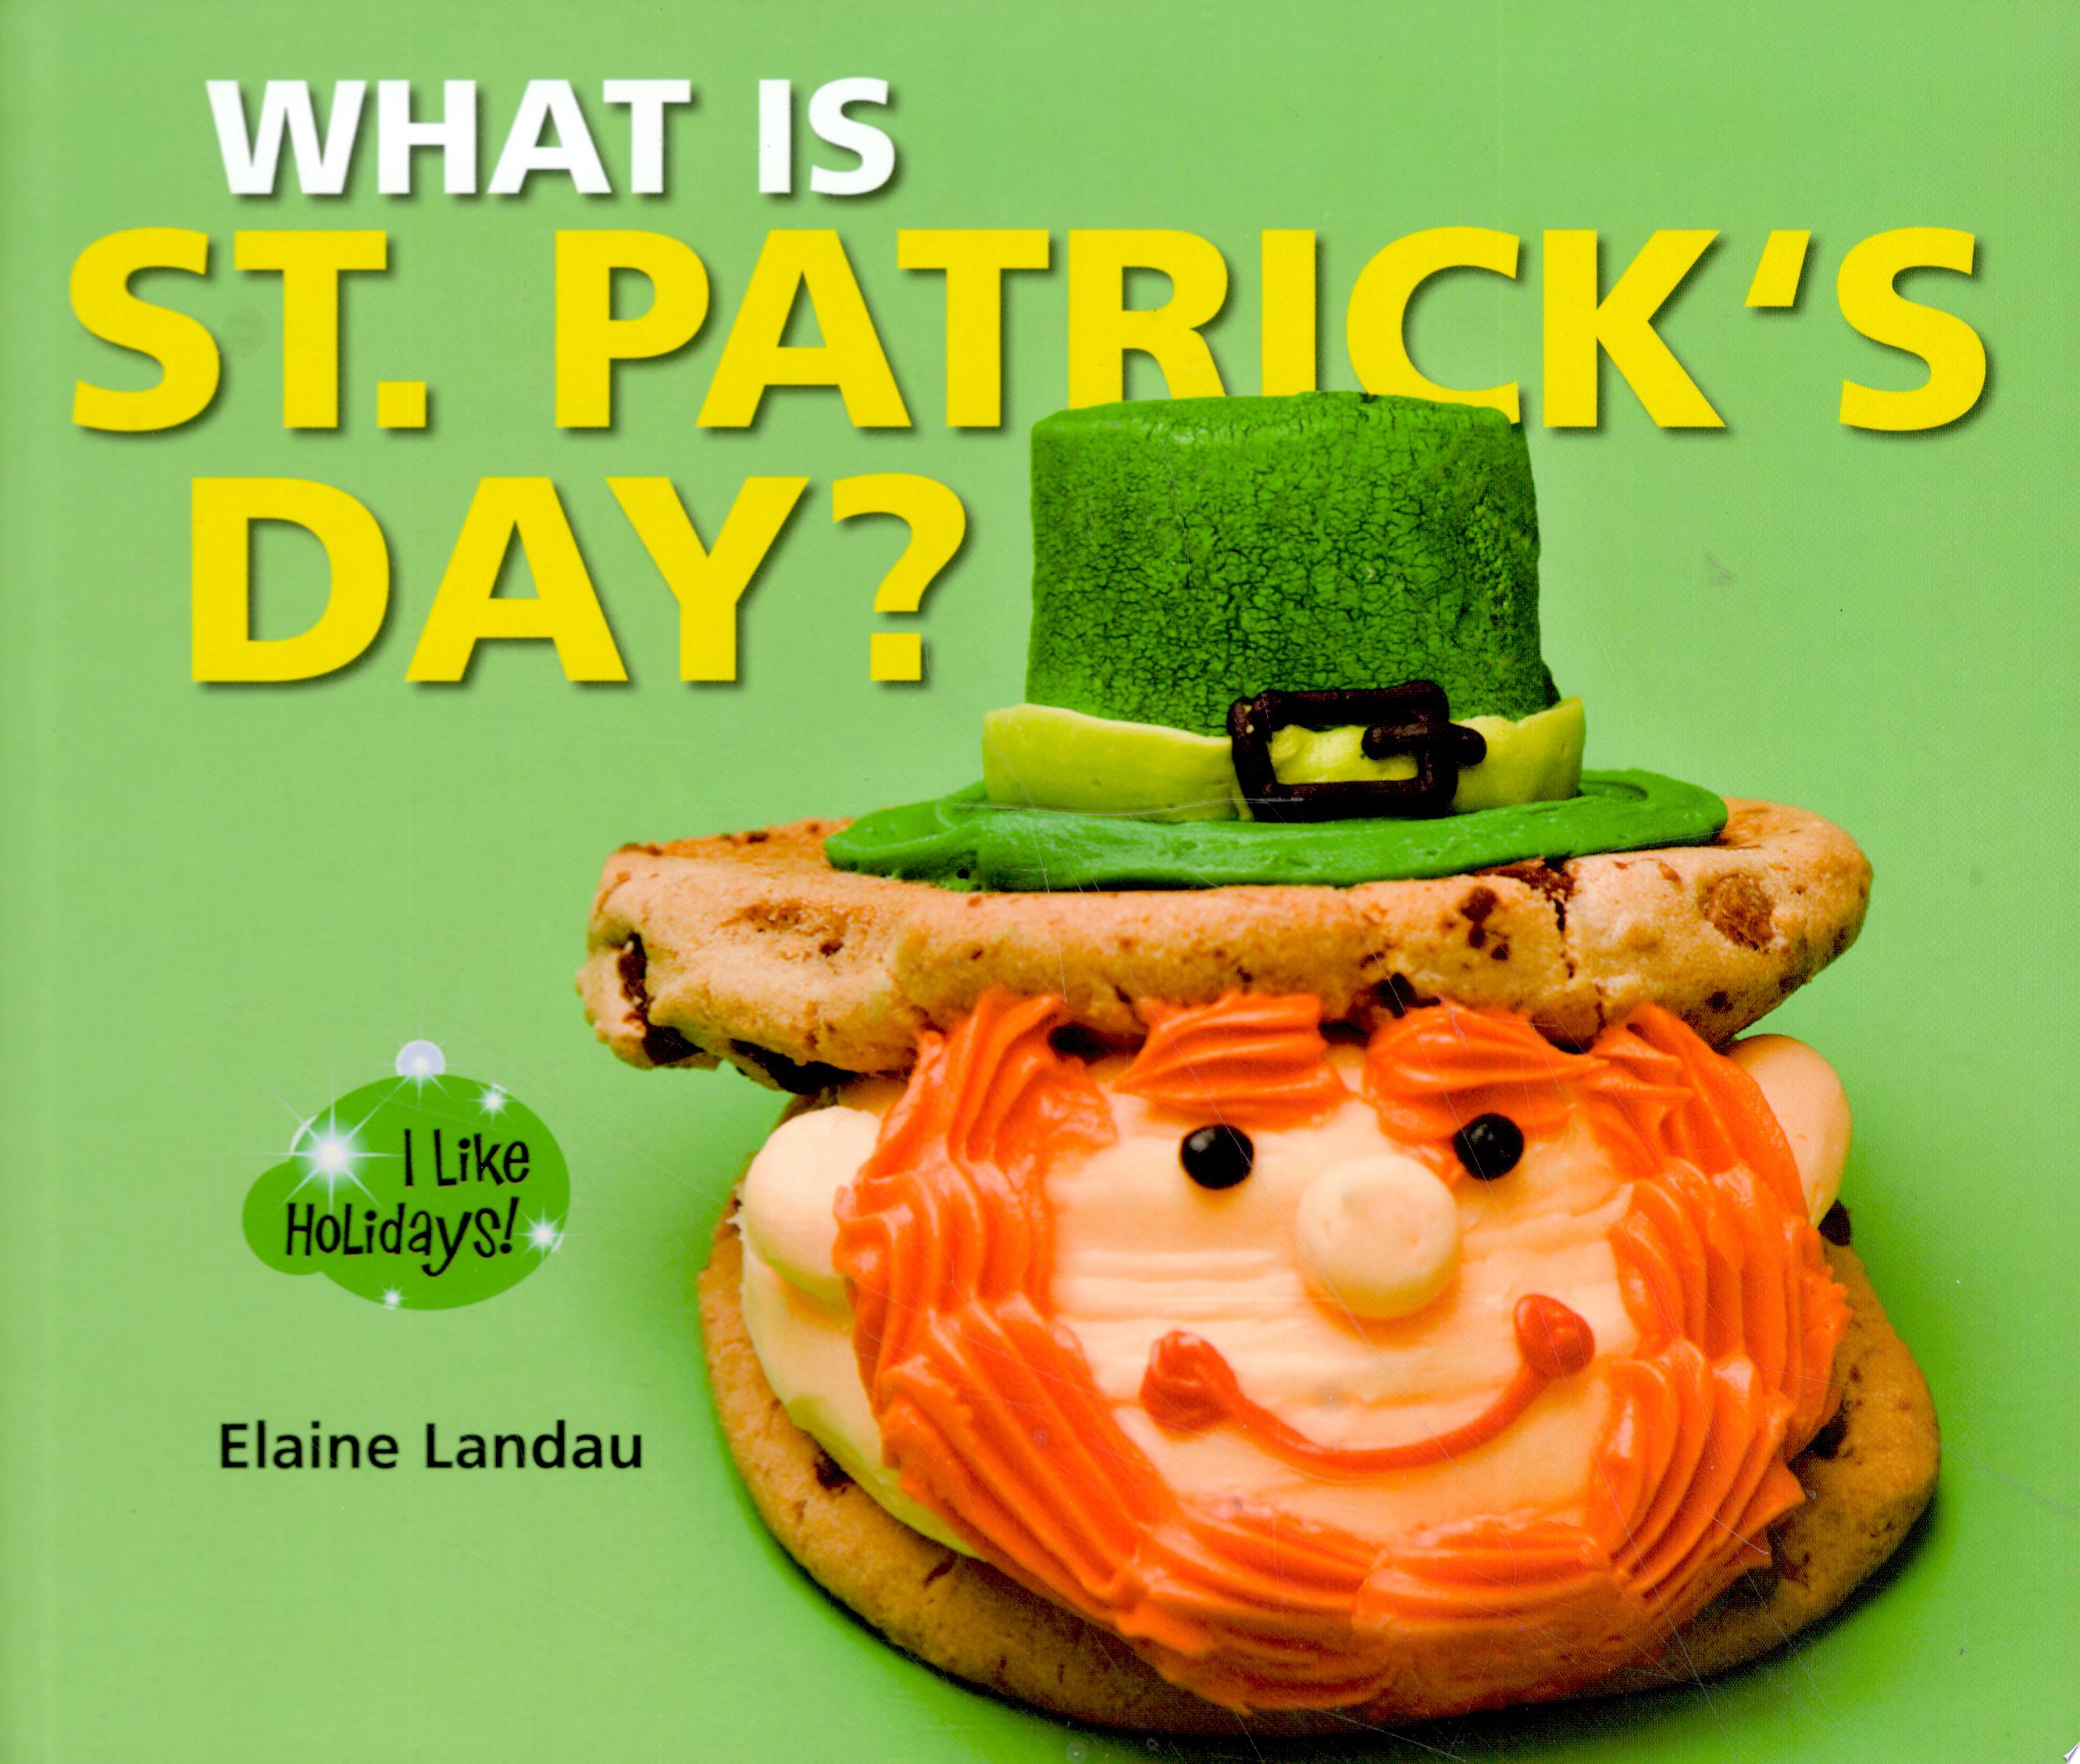 Image for "What Is St. Patrick's Day?"